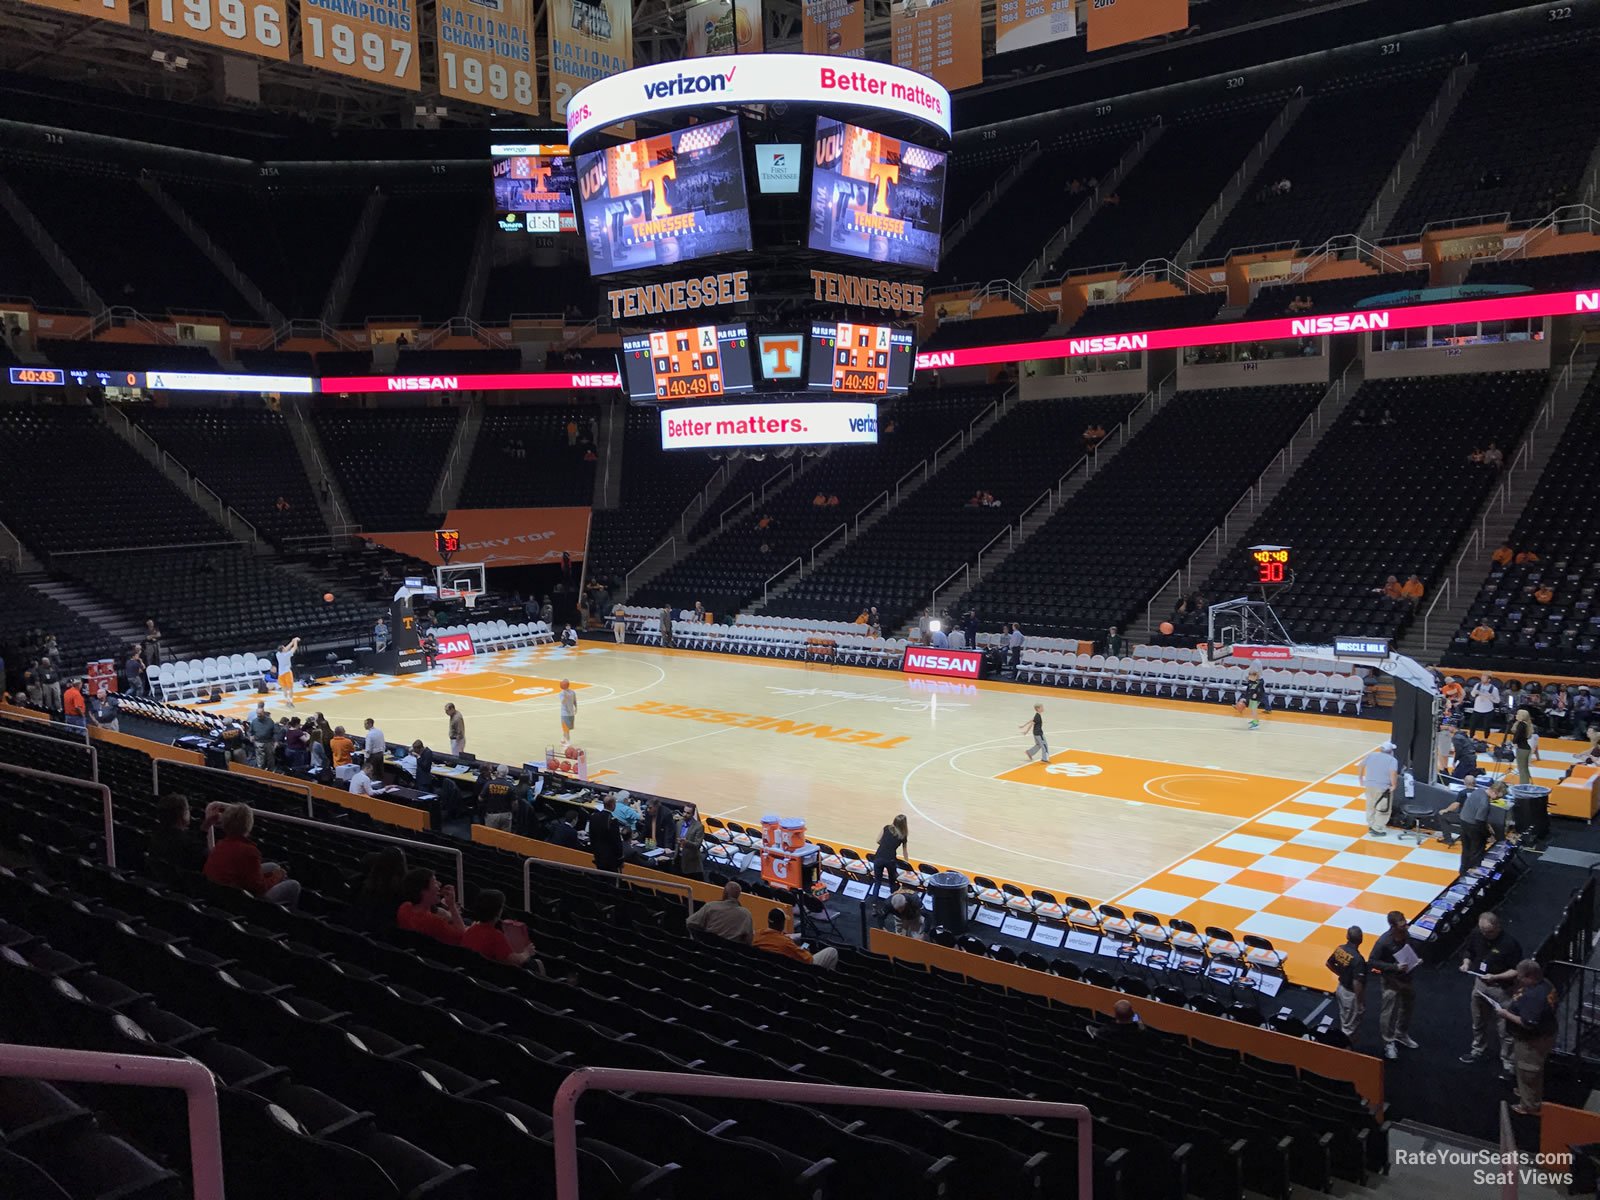 section 102, row 17 seat view  - thompson-boling arena